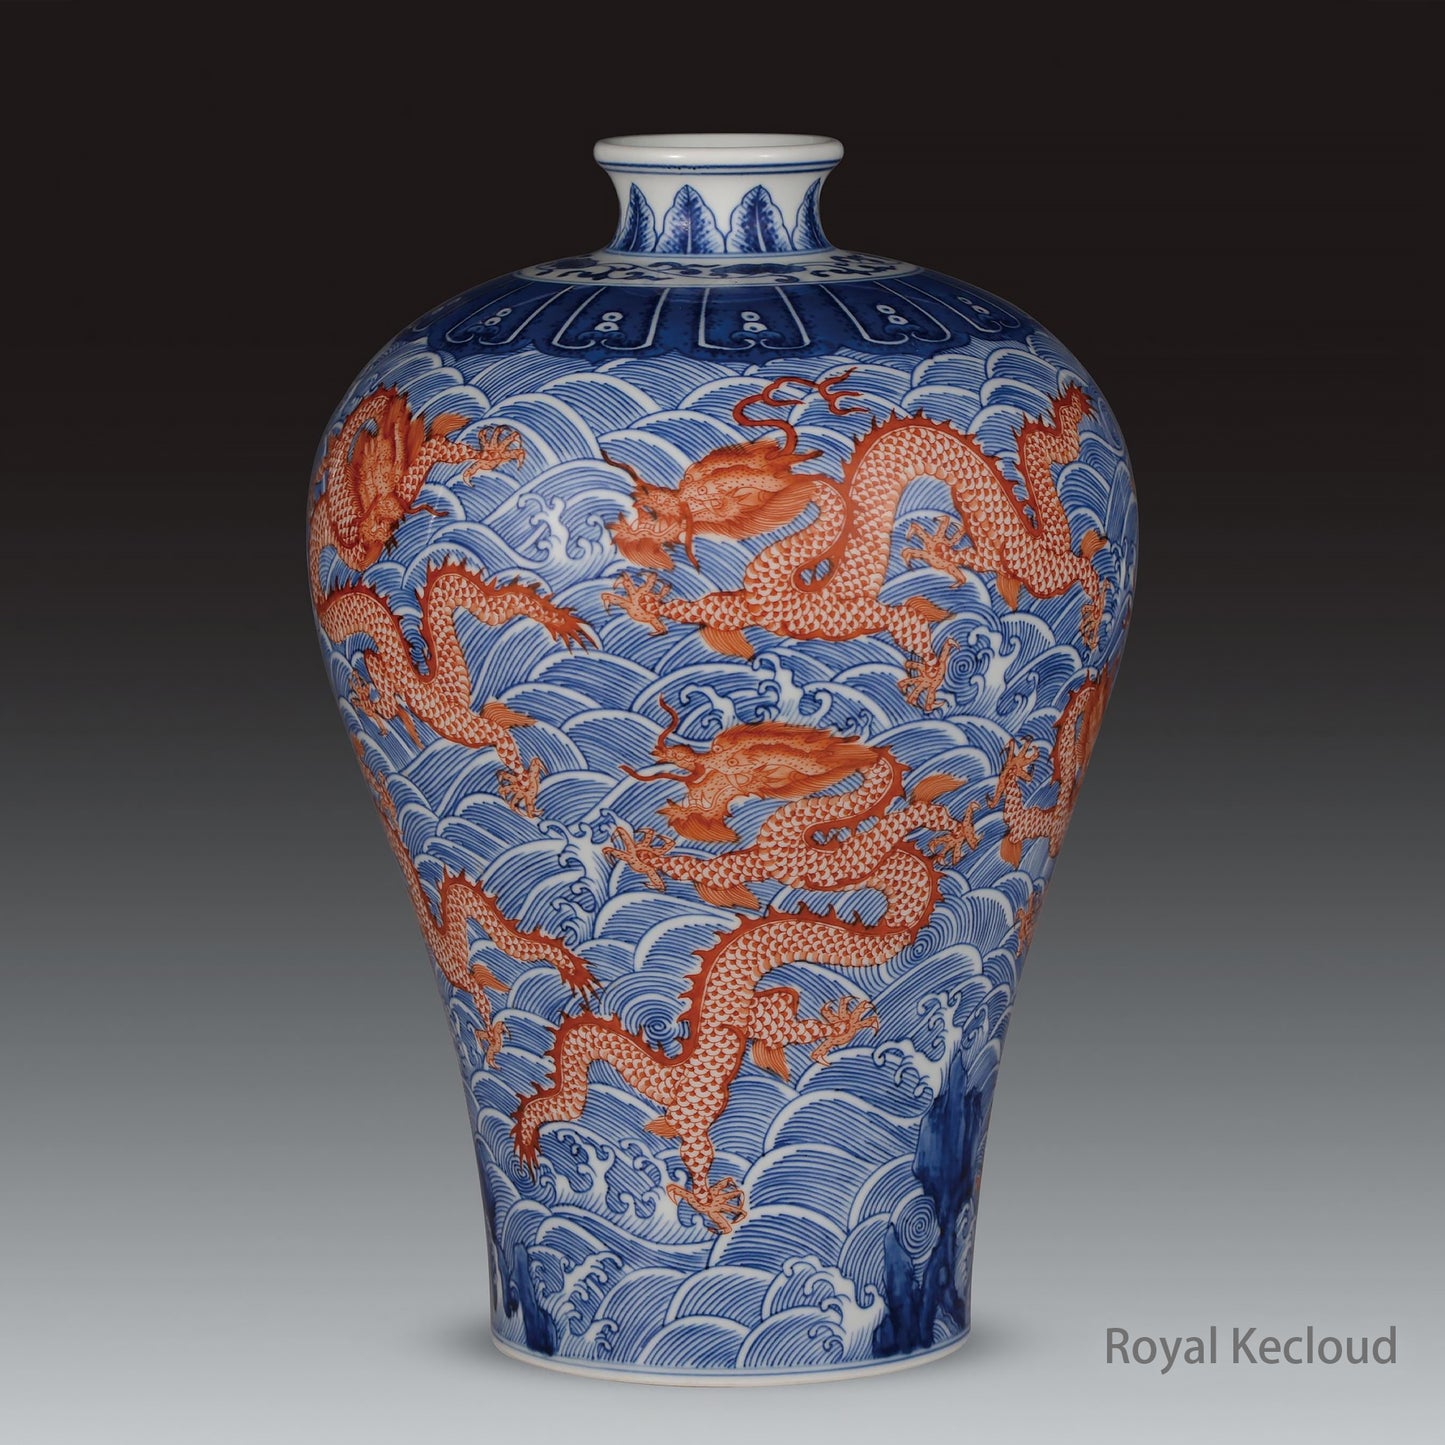 Chinese Blue and White Iron-red 'Dragons amid Waves' Porcelain Vase, Meiping. Emperor Ceramic Antique.